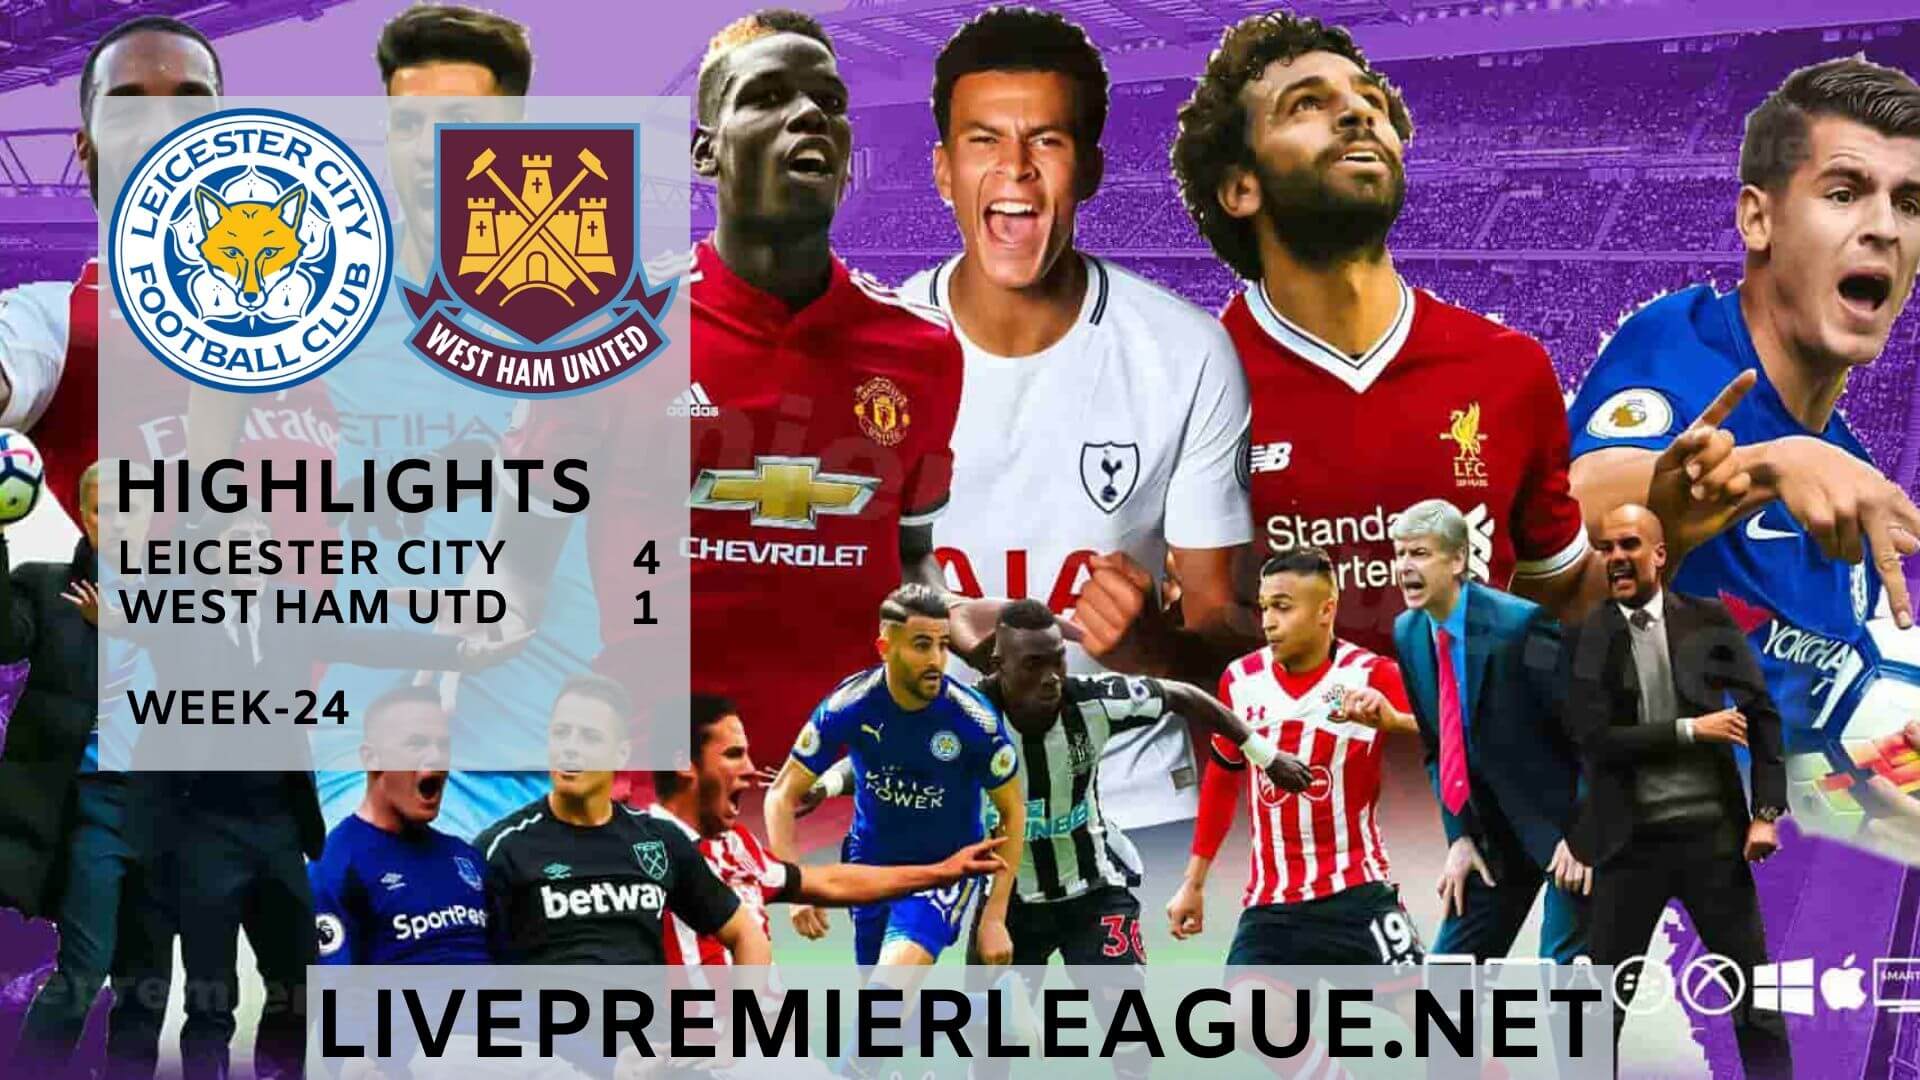 Leicester City Vs West Ham United Highlights 2020 Week 24